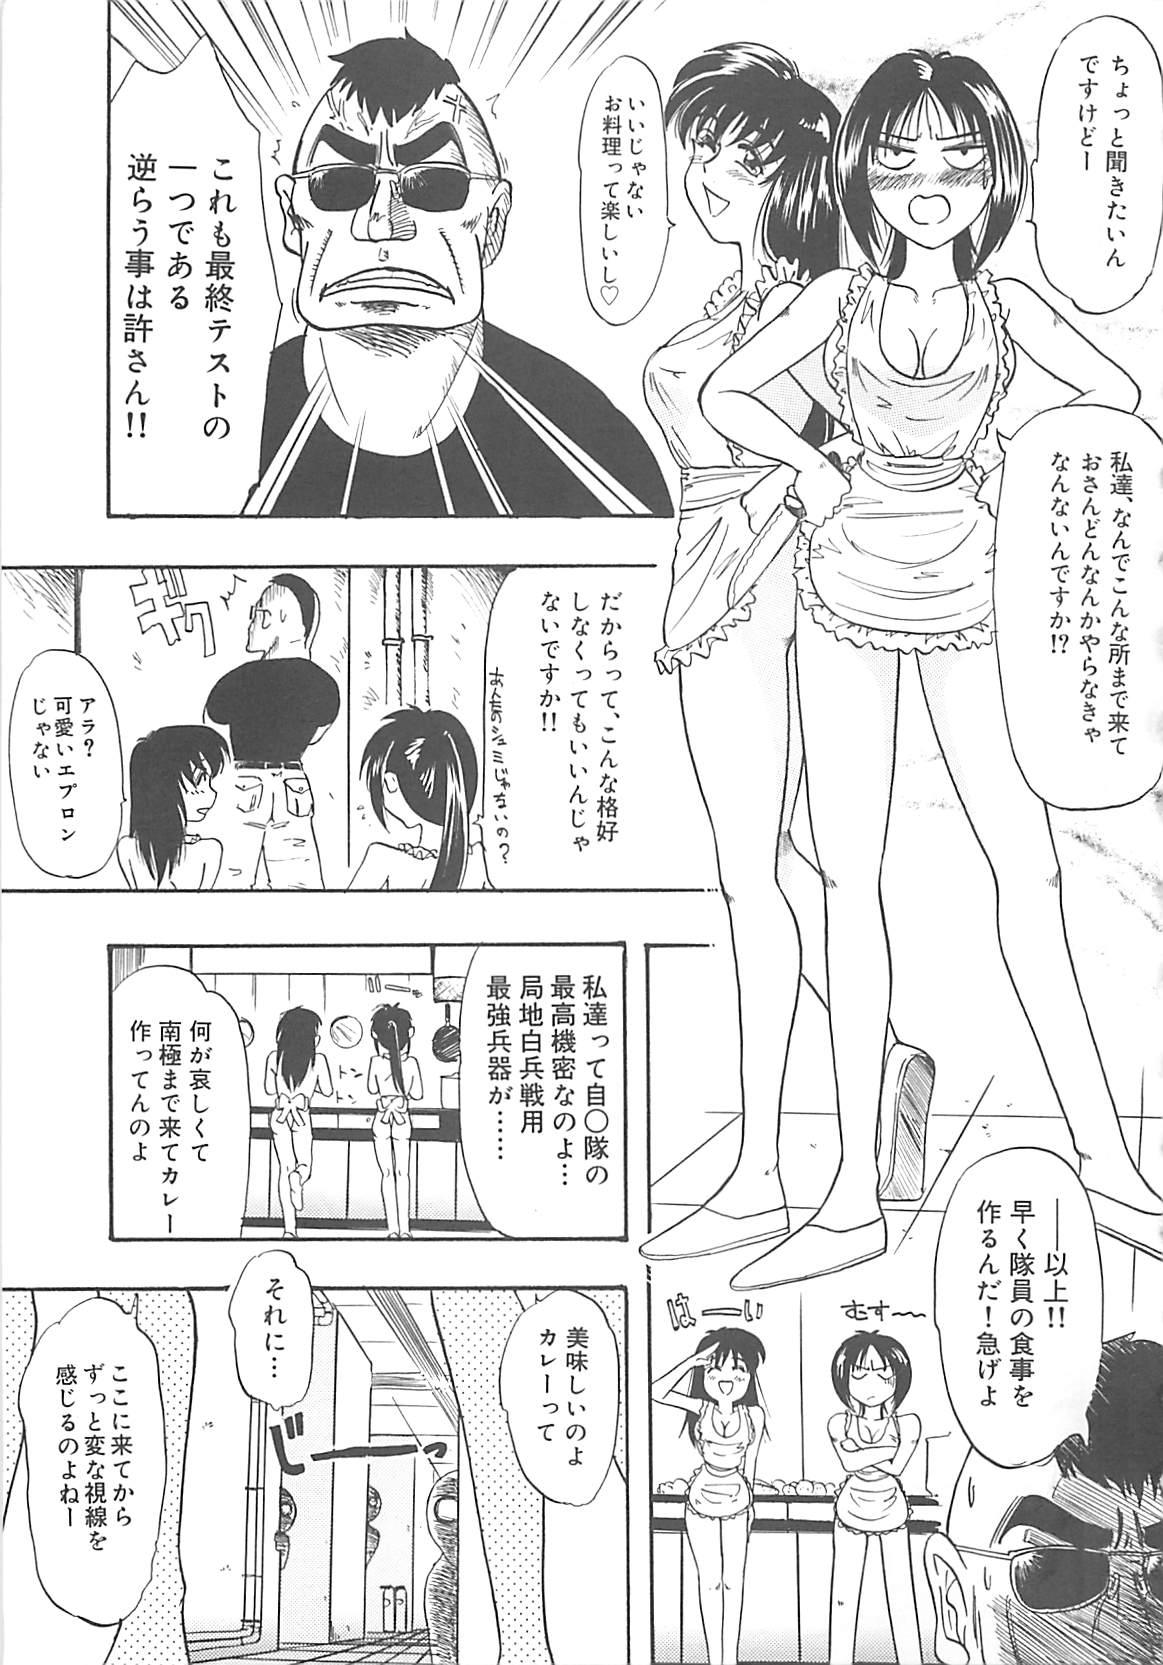 Sesso Sisters kyodai ～Demi human～ Infiel - Page 8